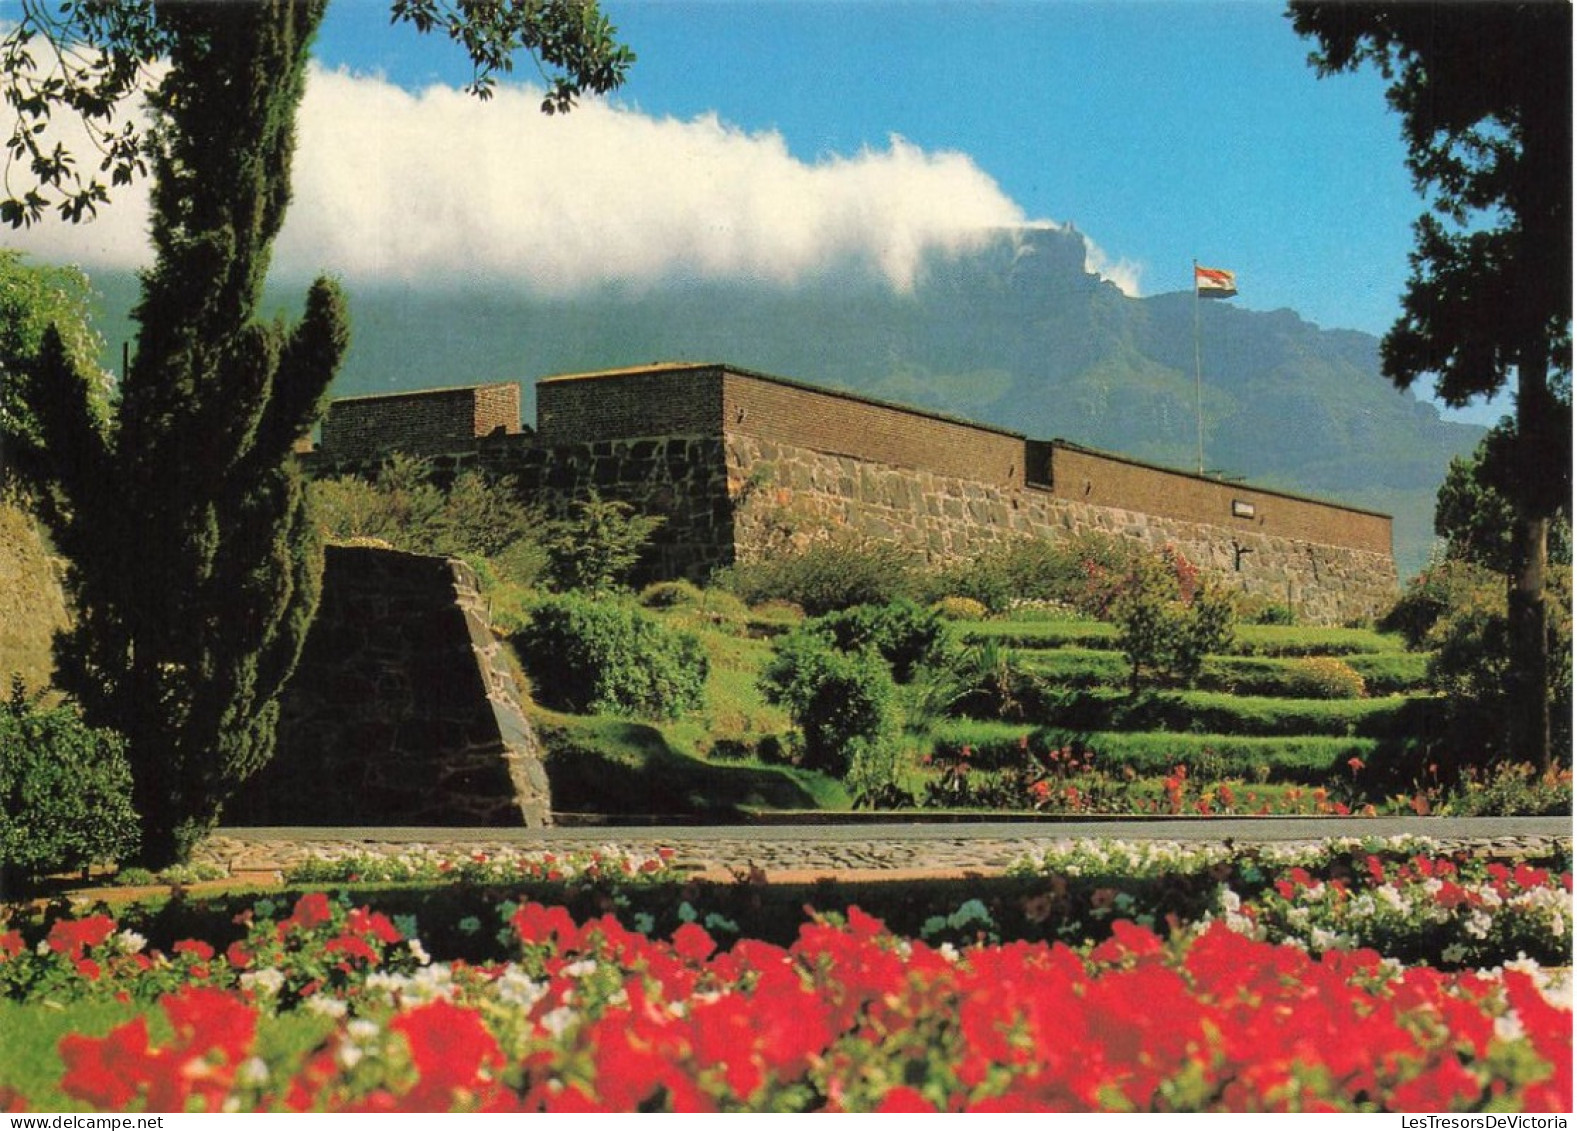 AFRIQUE DU SUD - Castle Of Good Hope - Cape Town - South Africa's Oldest Building Was Completed In 1679 - Carte Postale - Zuid-Afrika